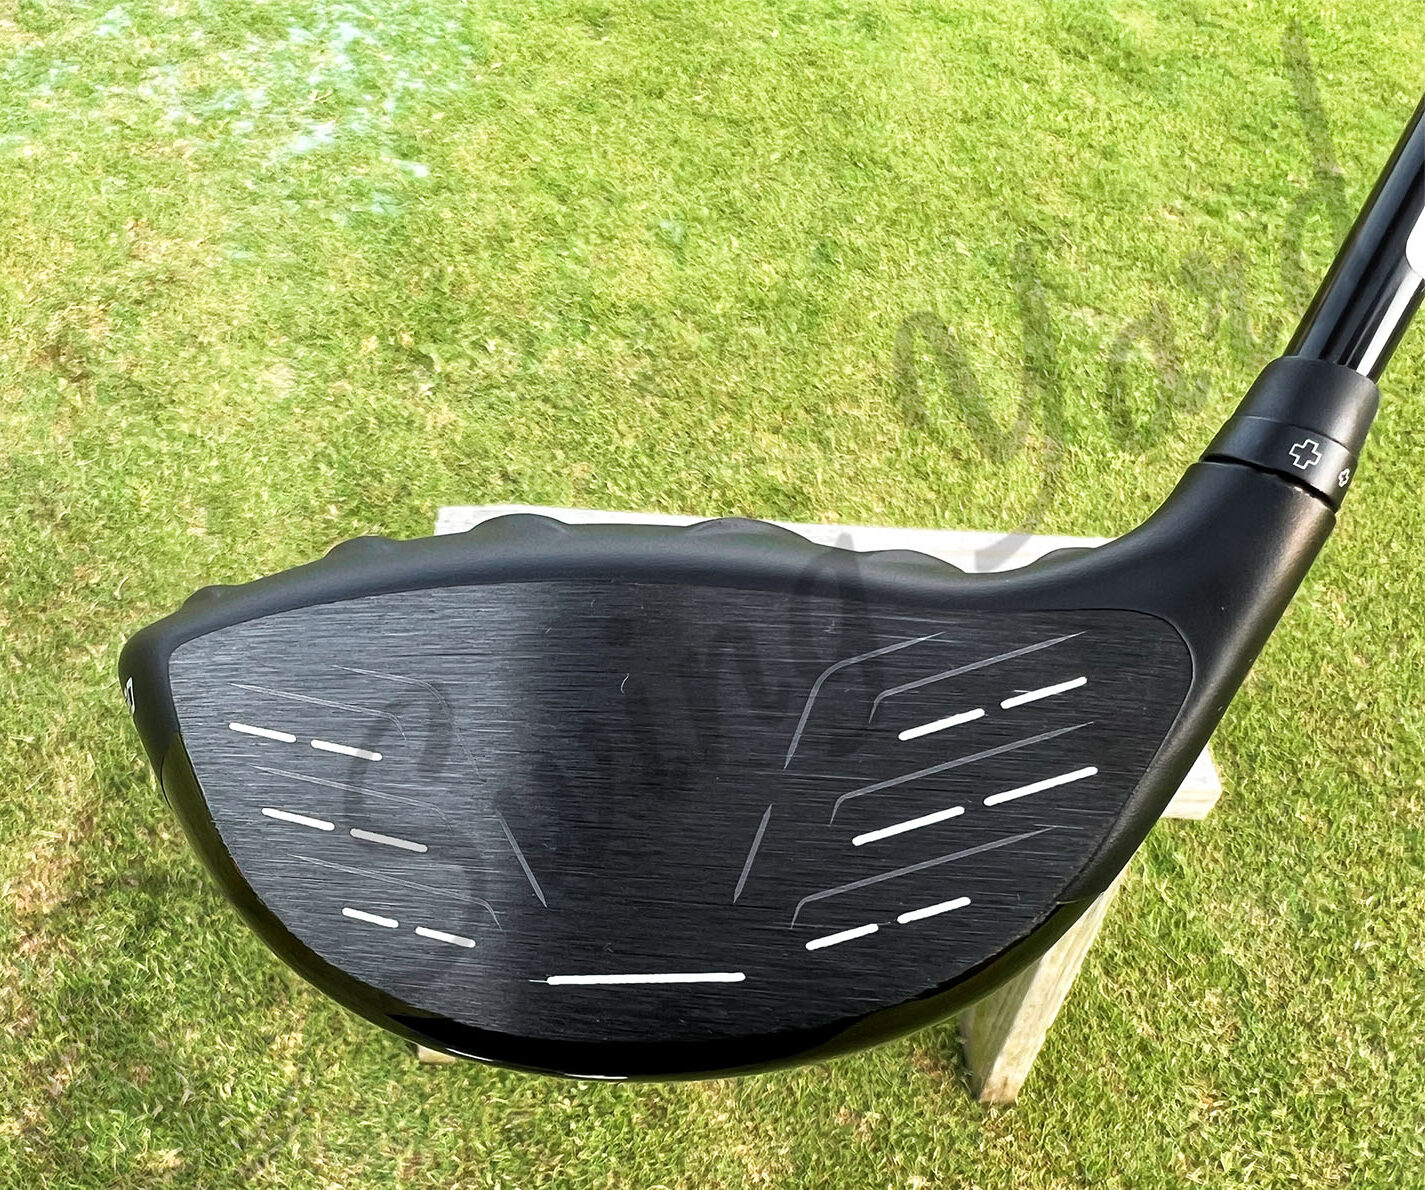 My Ping G430 max driver forged face